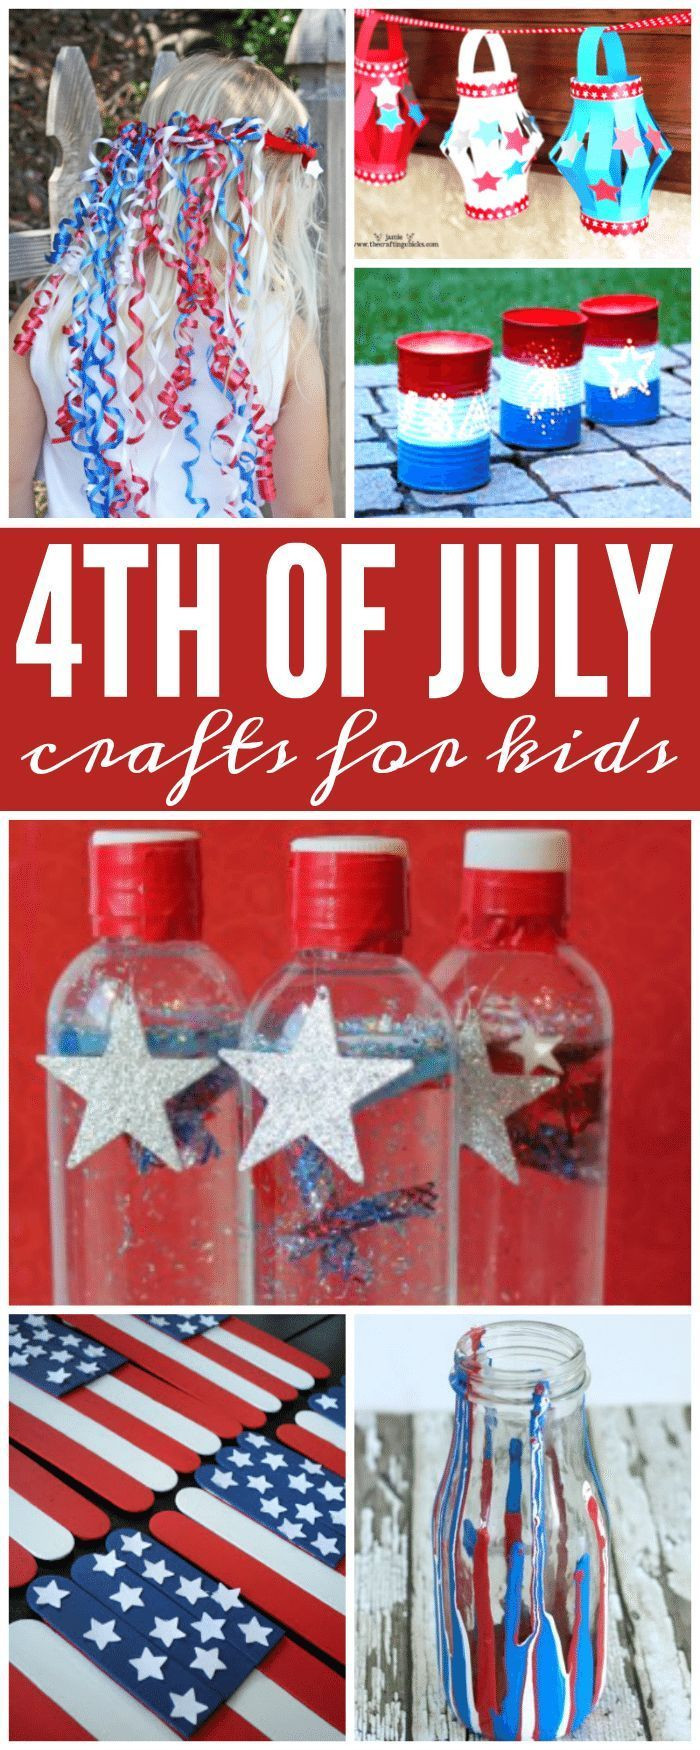 Pinterest 4th Of July Crafts
 Here are some super fun 4th of July Crafts for Kids for